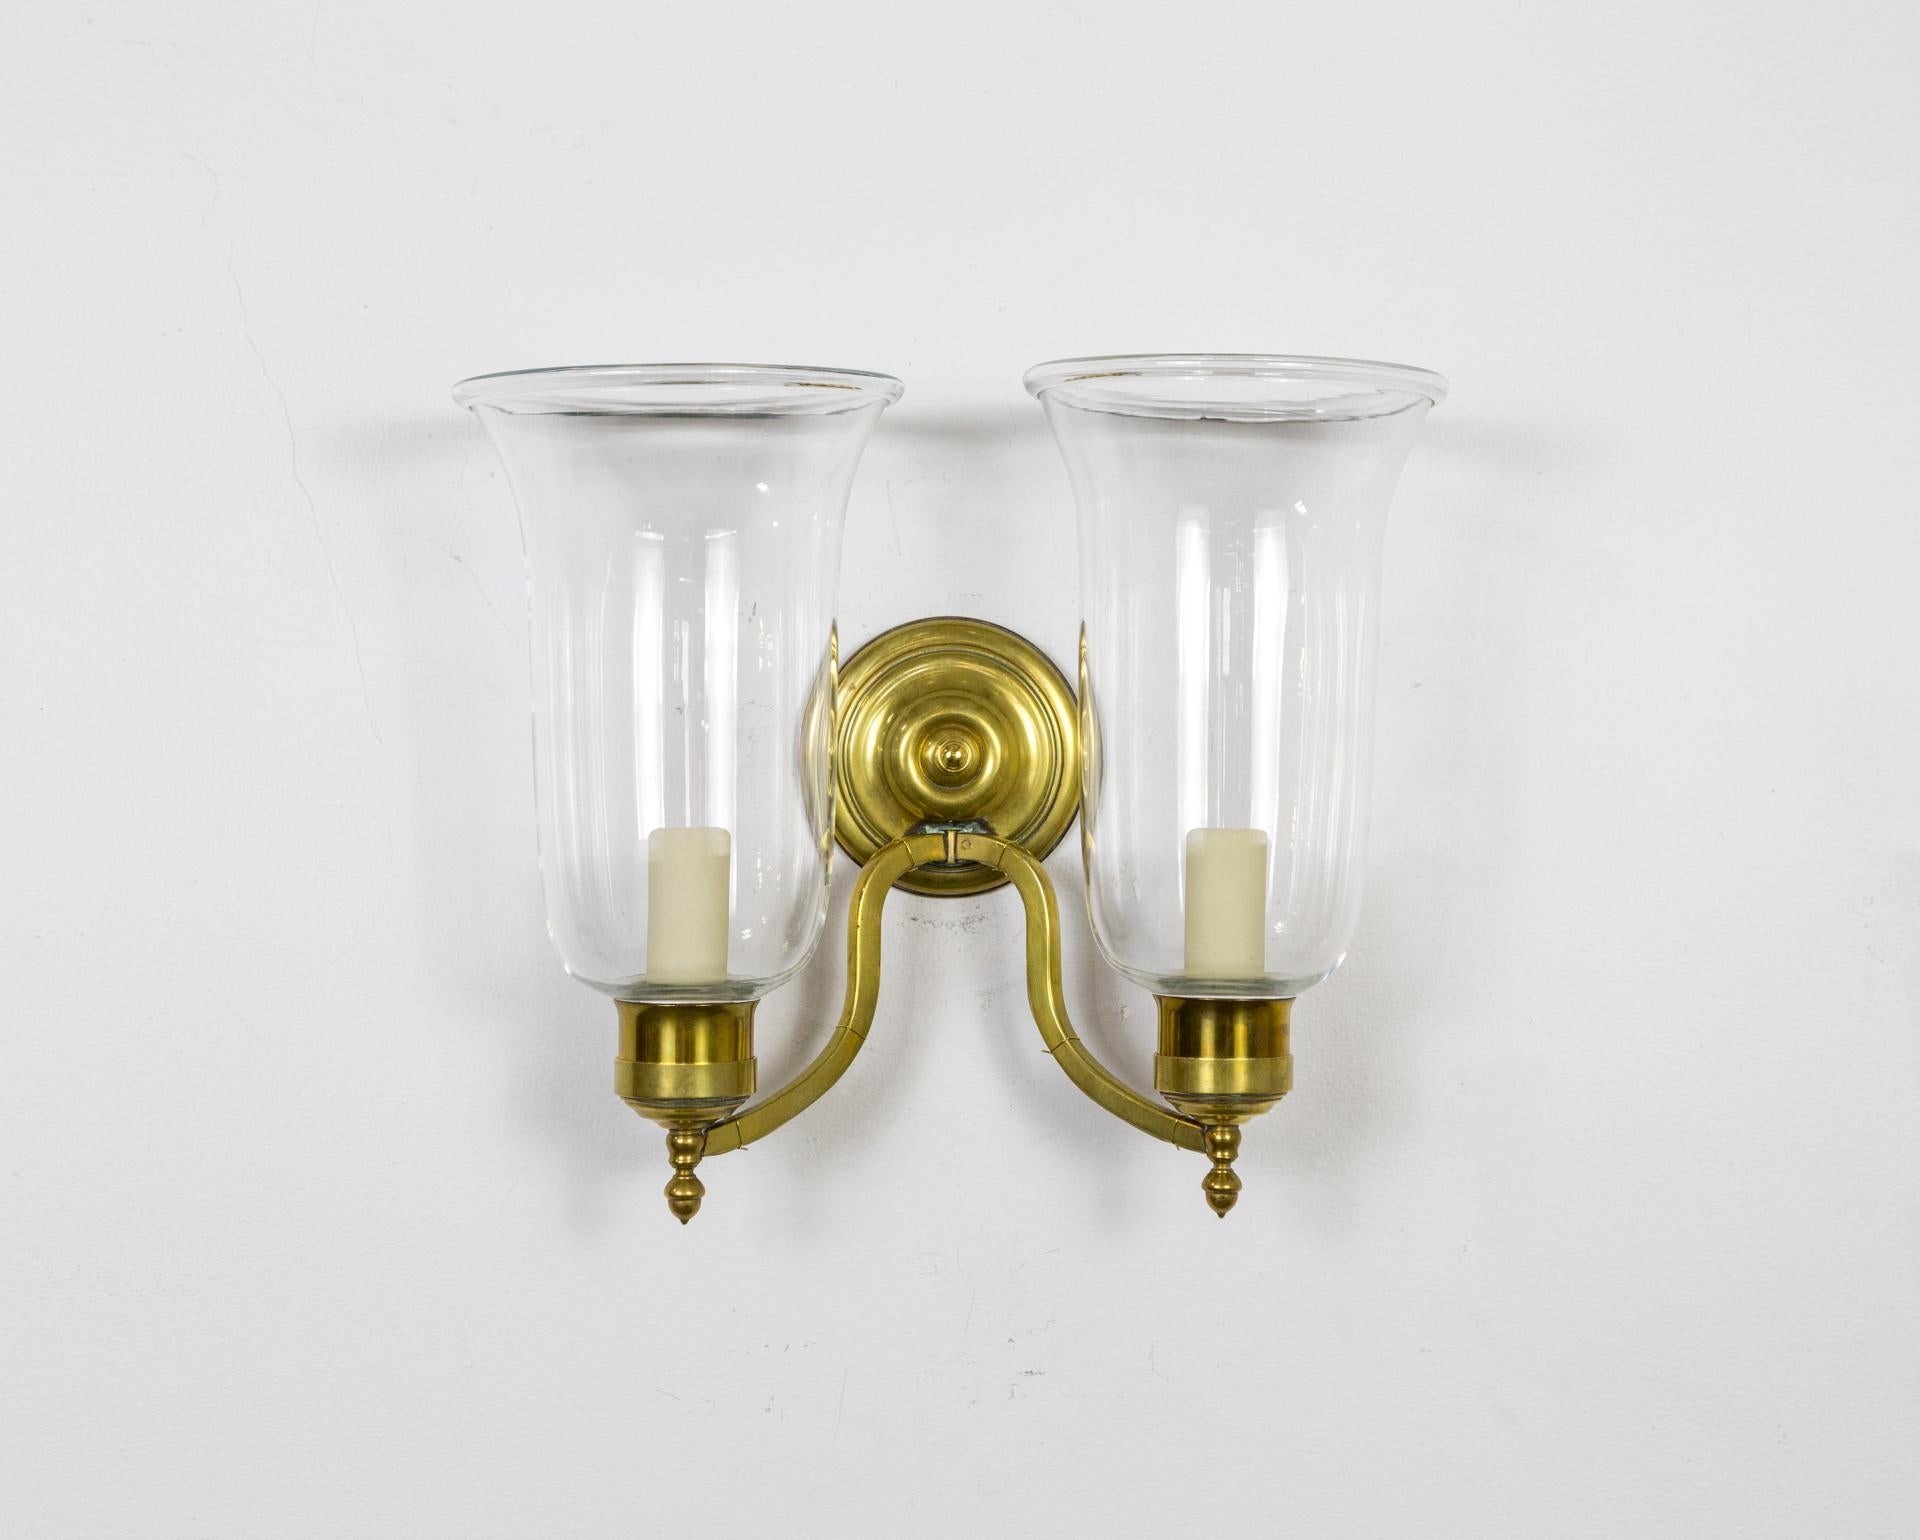 A fine pair of neoclassical style, extended double arm, brass sconces with heavy, blown glass chimney shades and rosette detail. American, 1980s. Recently restored and rewired.